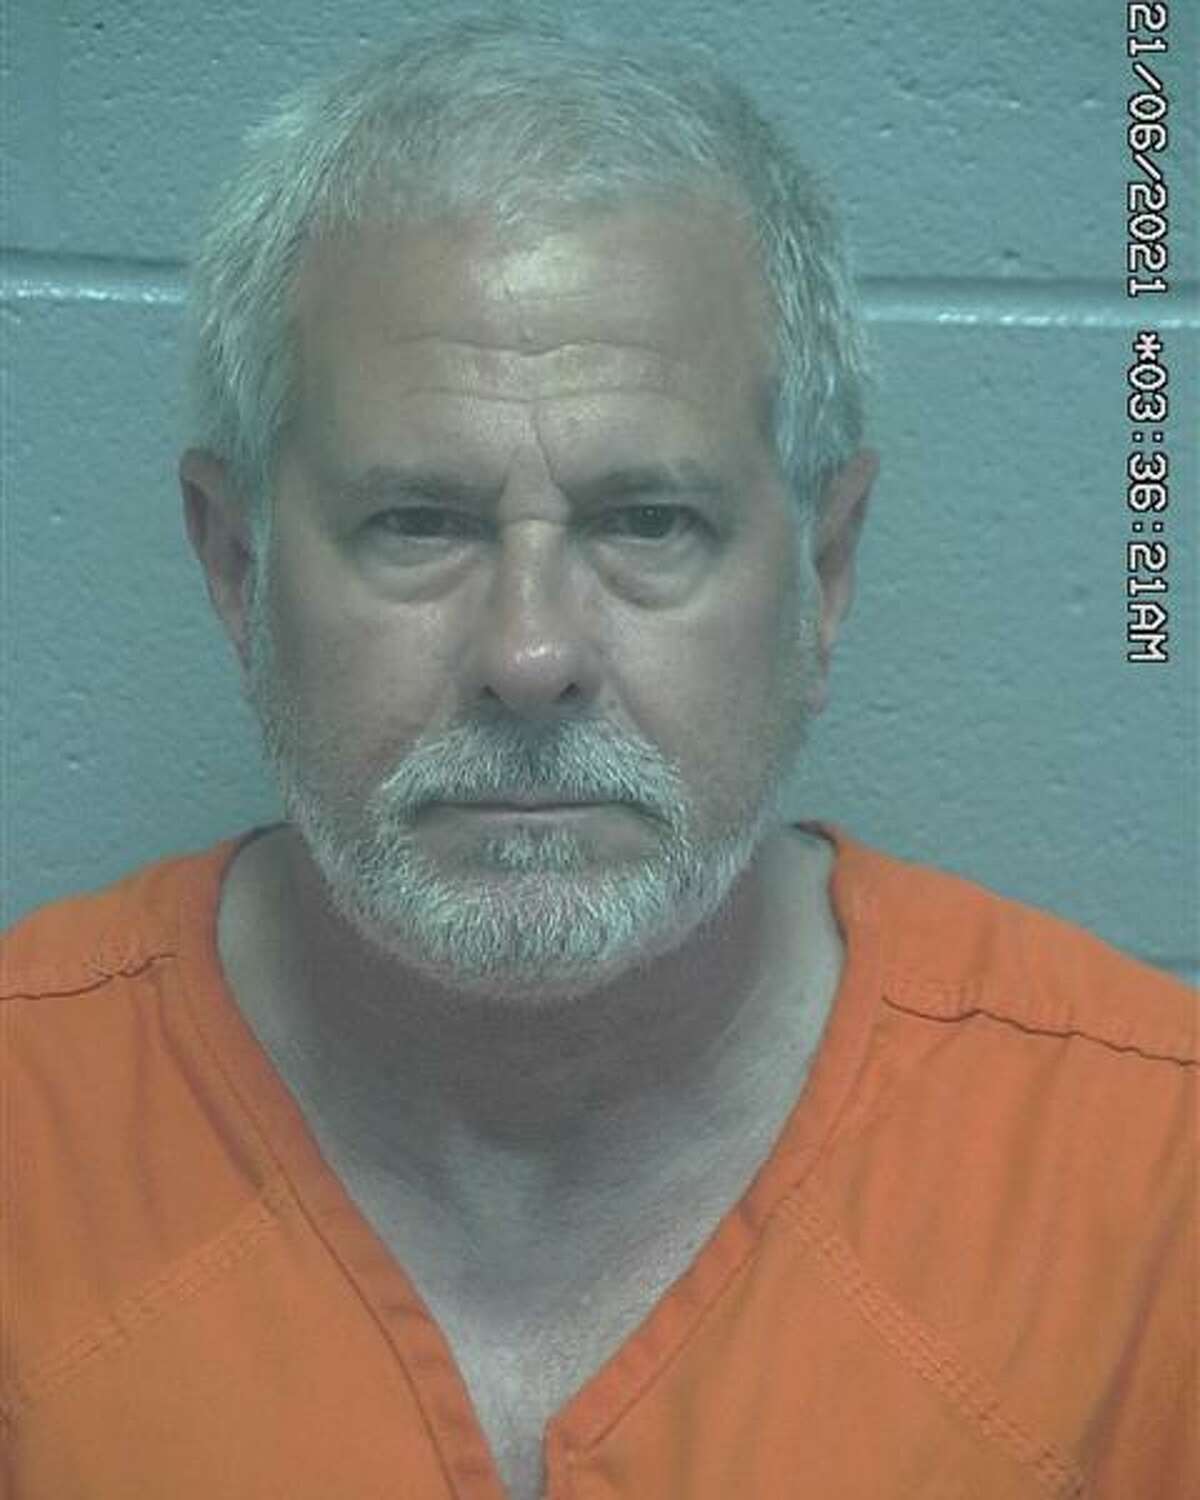 Brian Charles Stubbs, 62, was arrested June 20, 2021, and charged with aggravated assault causing serious bodily injury and using a deadly weapon.